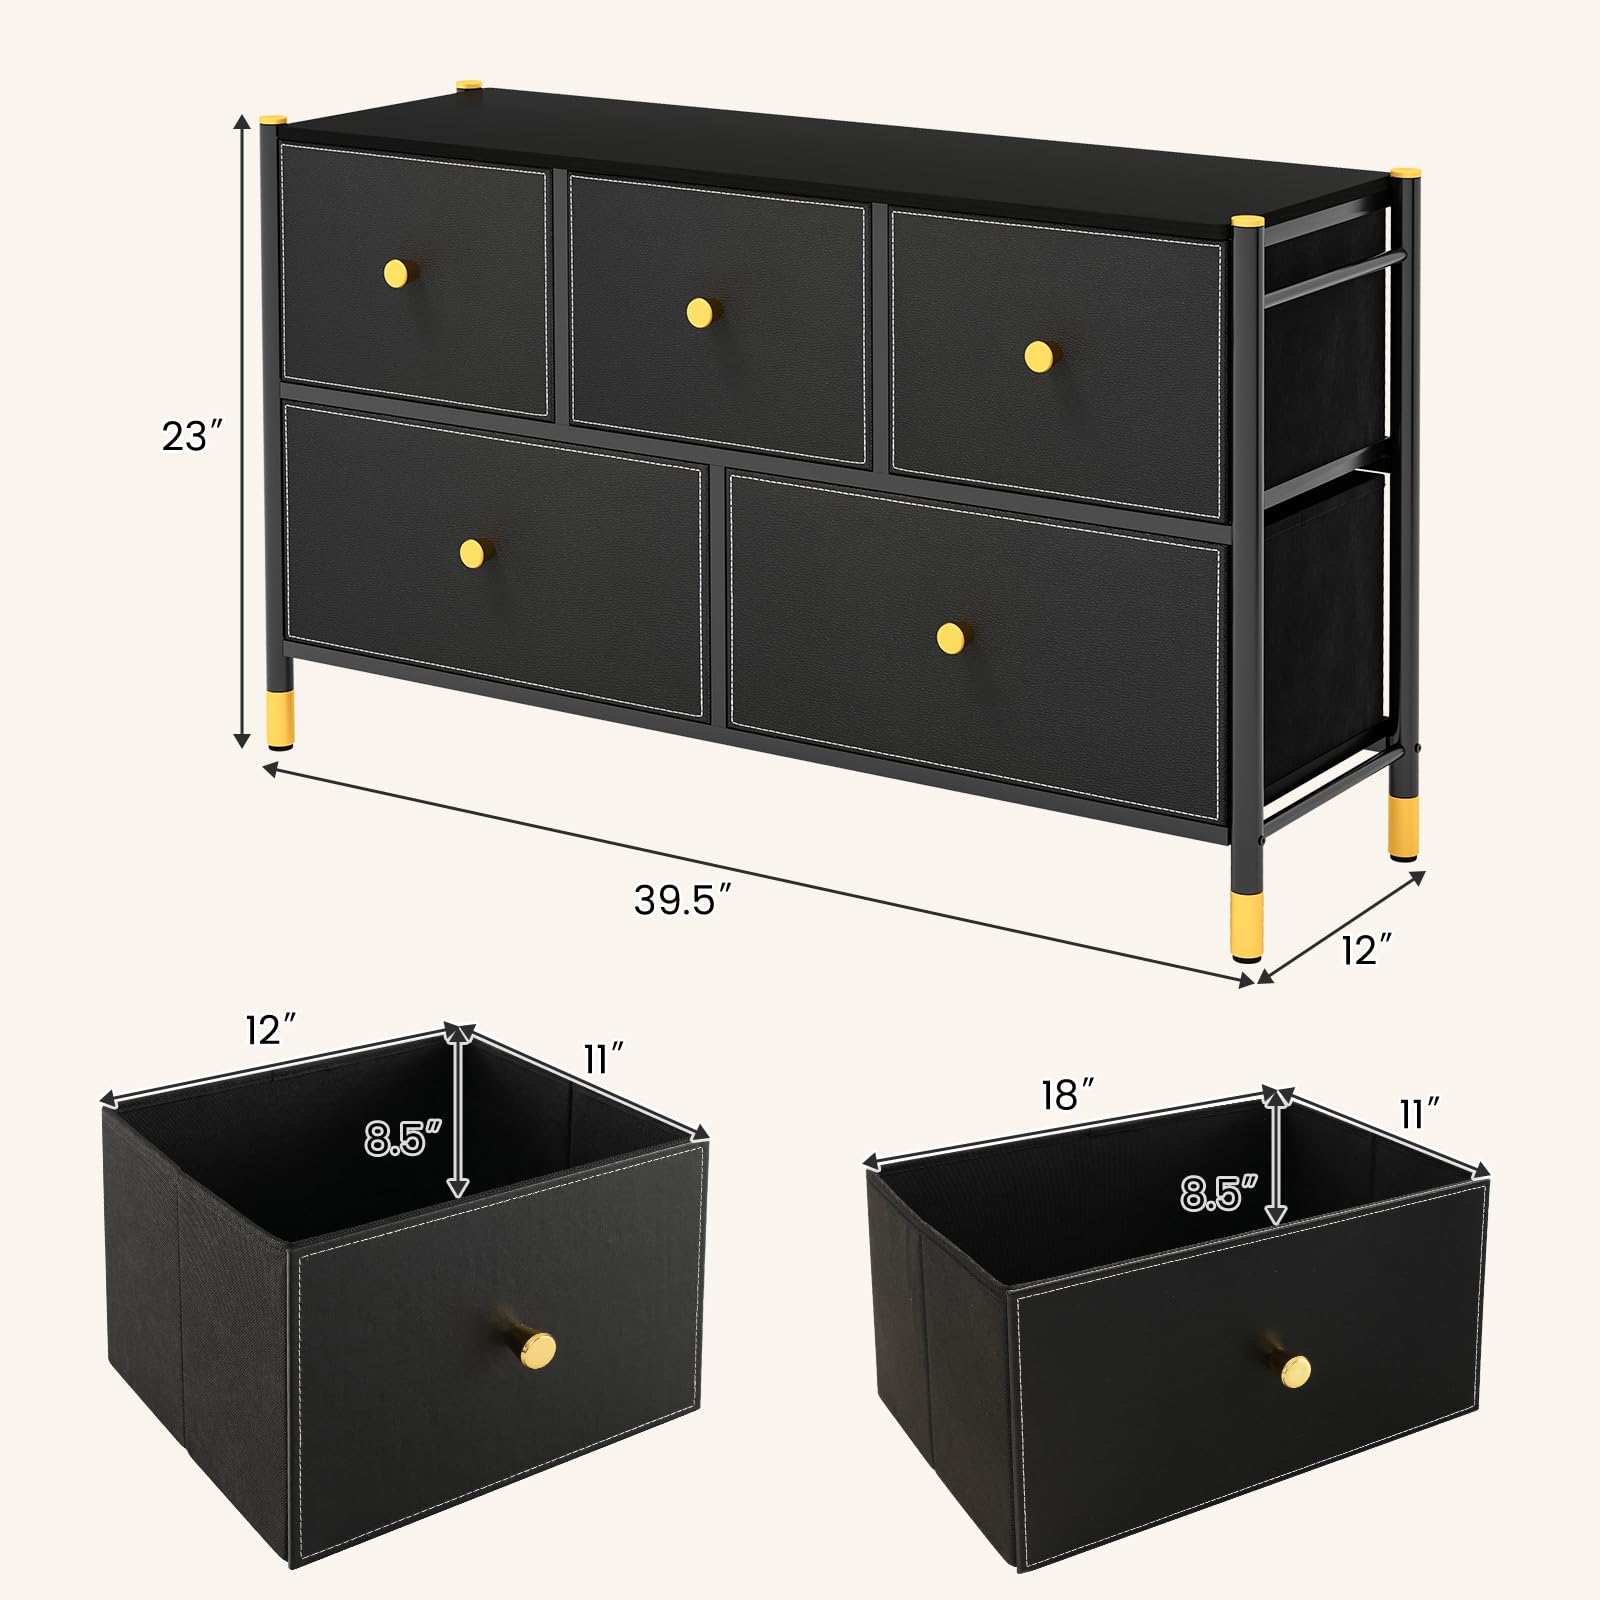 Giantex Dresser for Bedroom with 5 Storage Drawers - Fabric Dresser Tower with Metal Frame, Fabric Bins